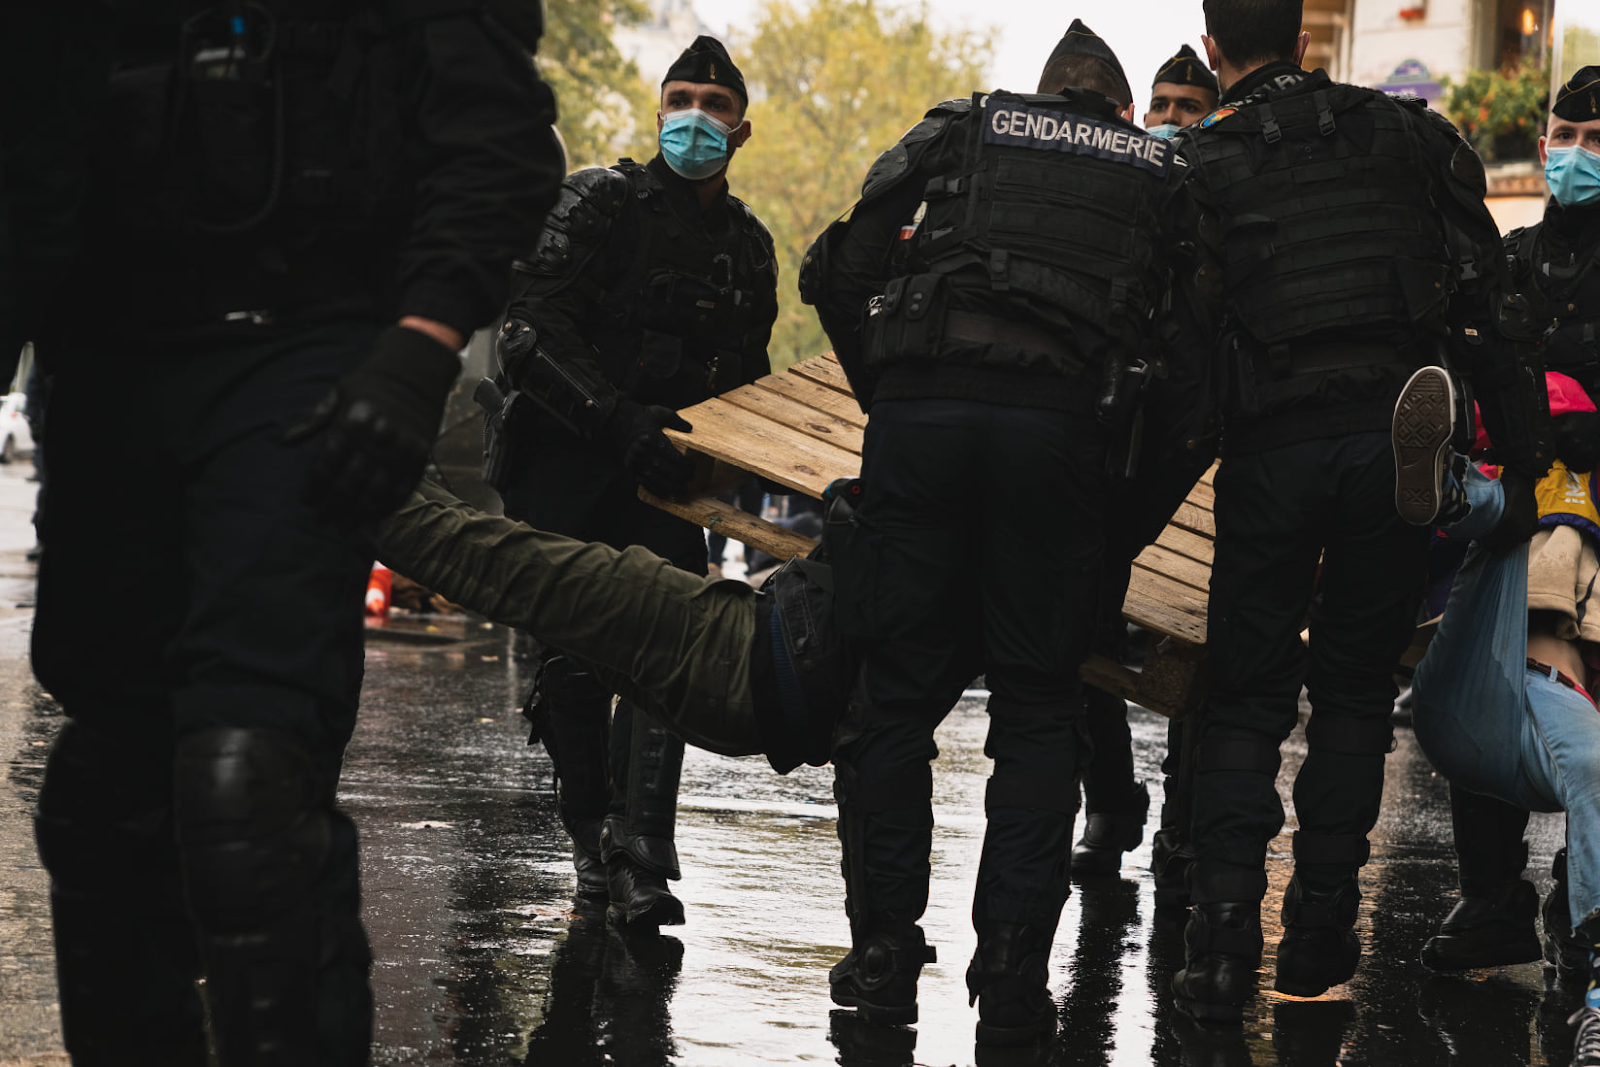 Rebels “violently resisting” arrest according to Frenchpolice.